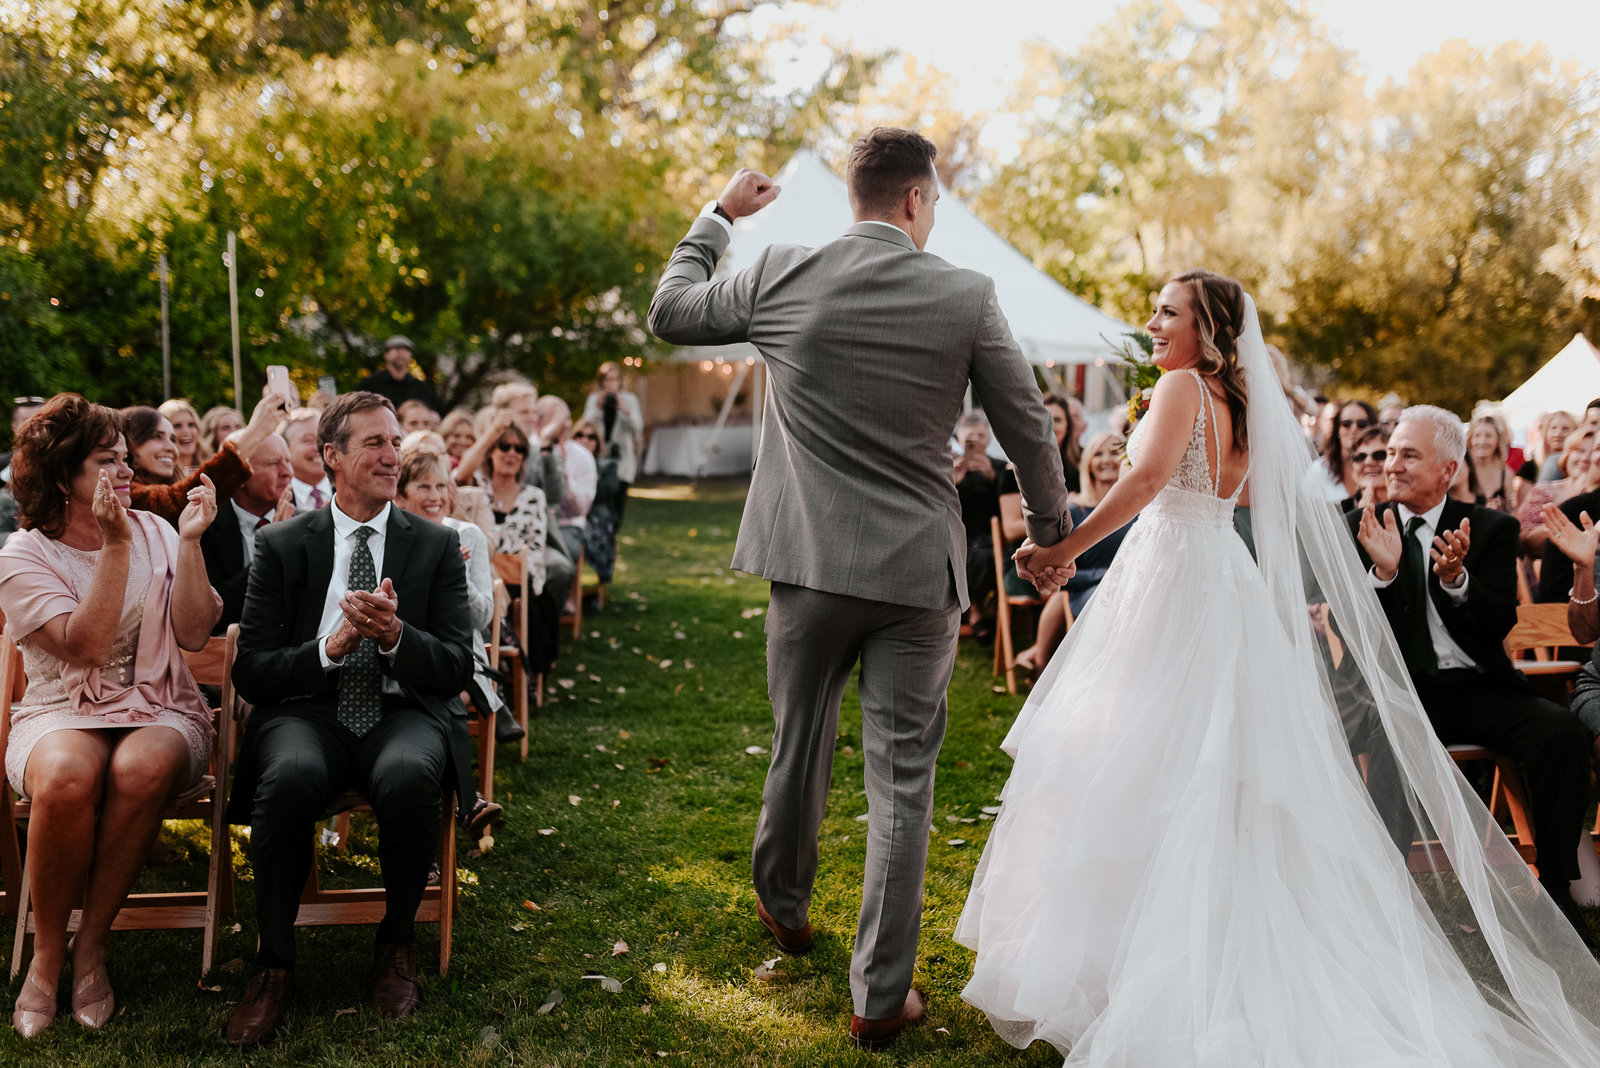 Bride and groom walking down the aisle after being married in outdoor ceremony in Longmont Colorado